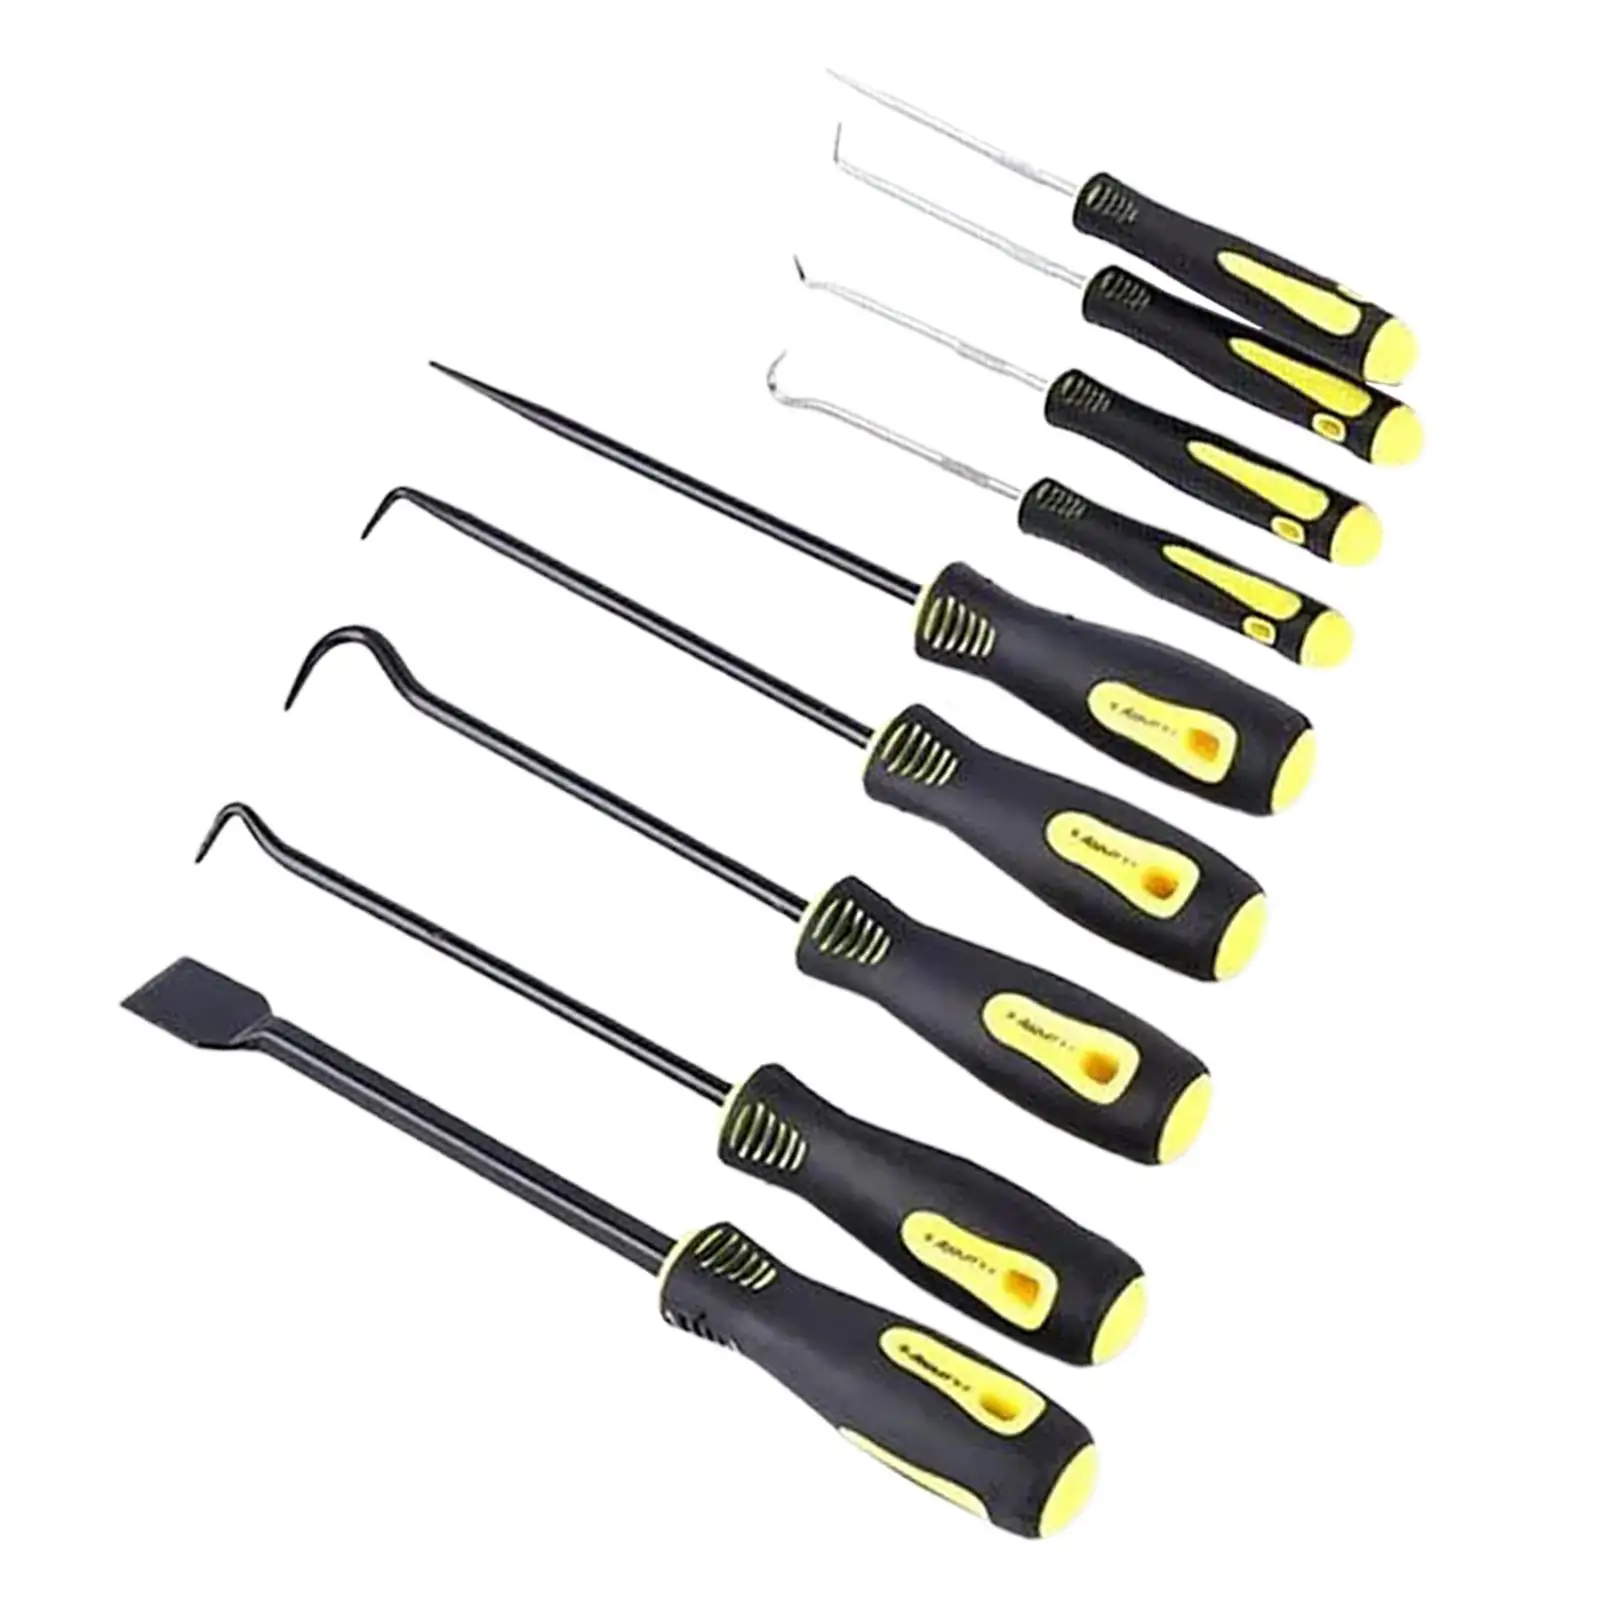 9Pcs Heavy Duty Oil Seal Screwdriver Set Precision Hand Tools Pick and Hook Oil Seal Hook for Automobile Electronic Car Vehicle